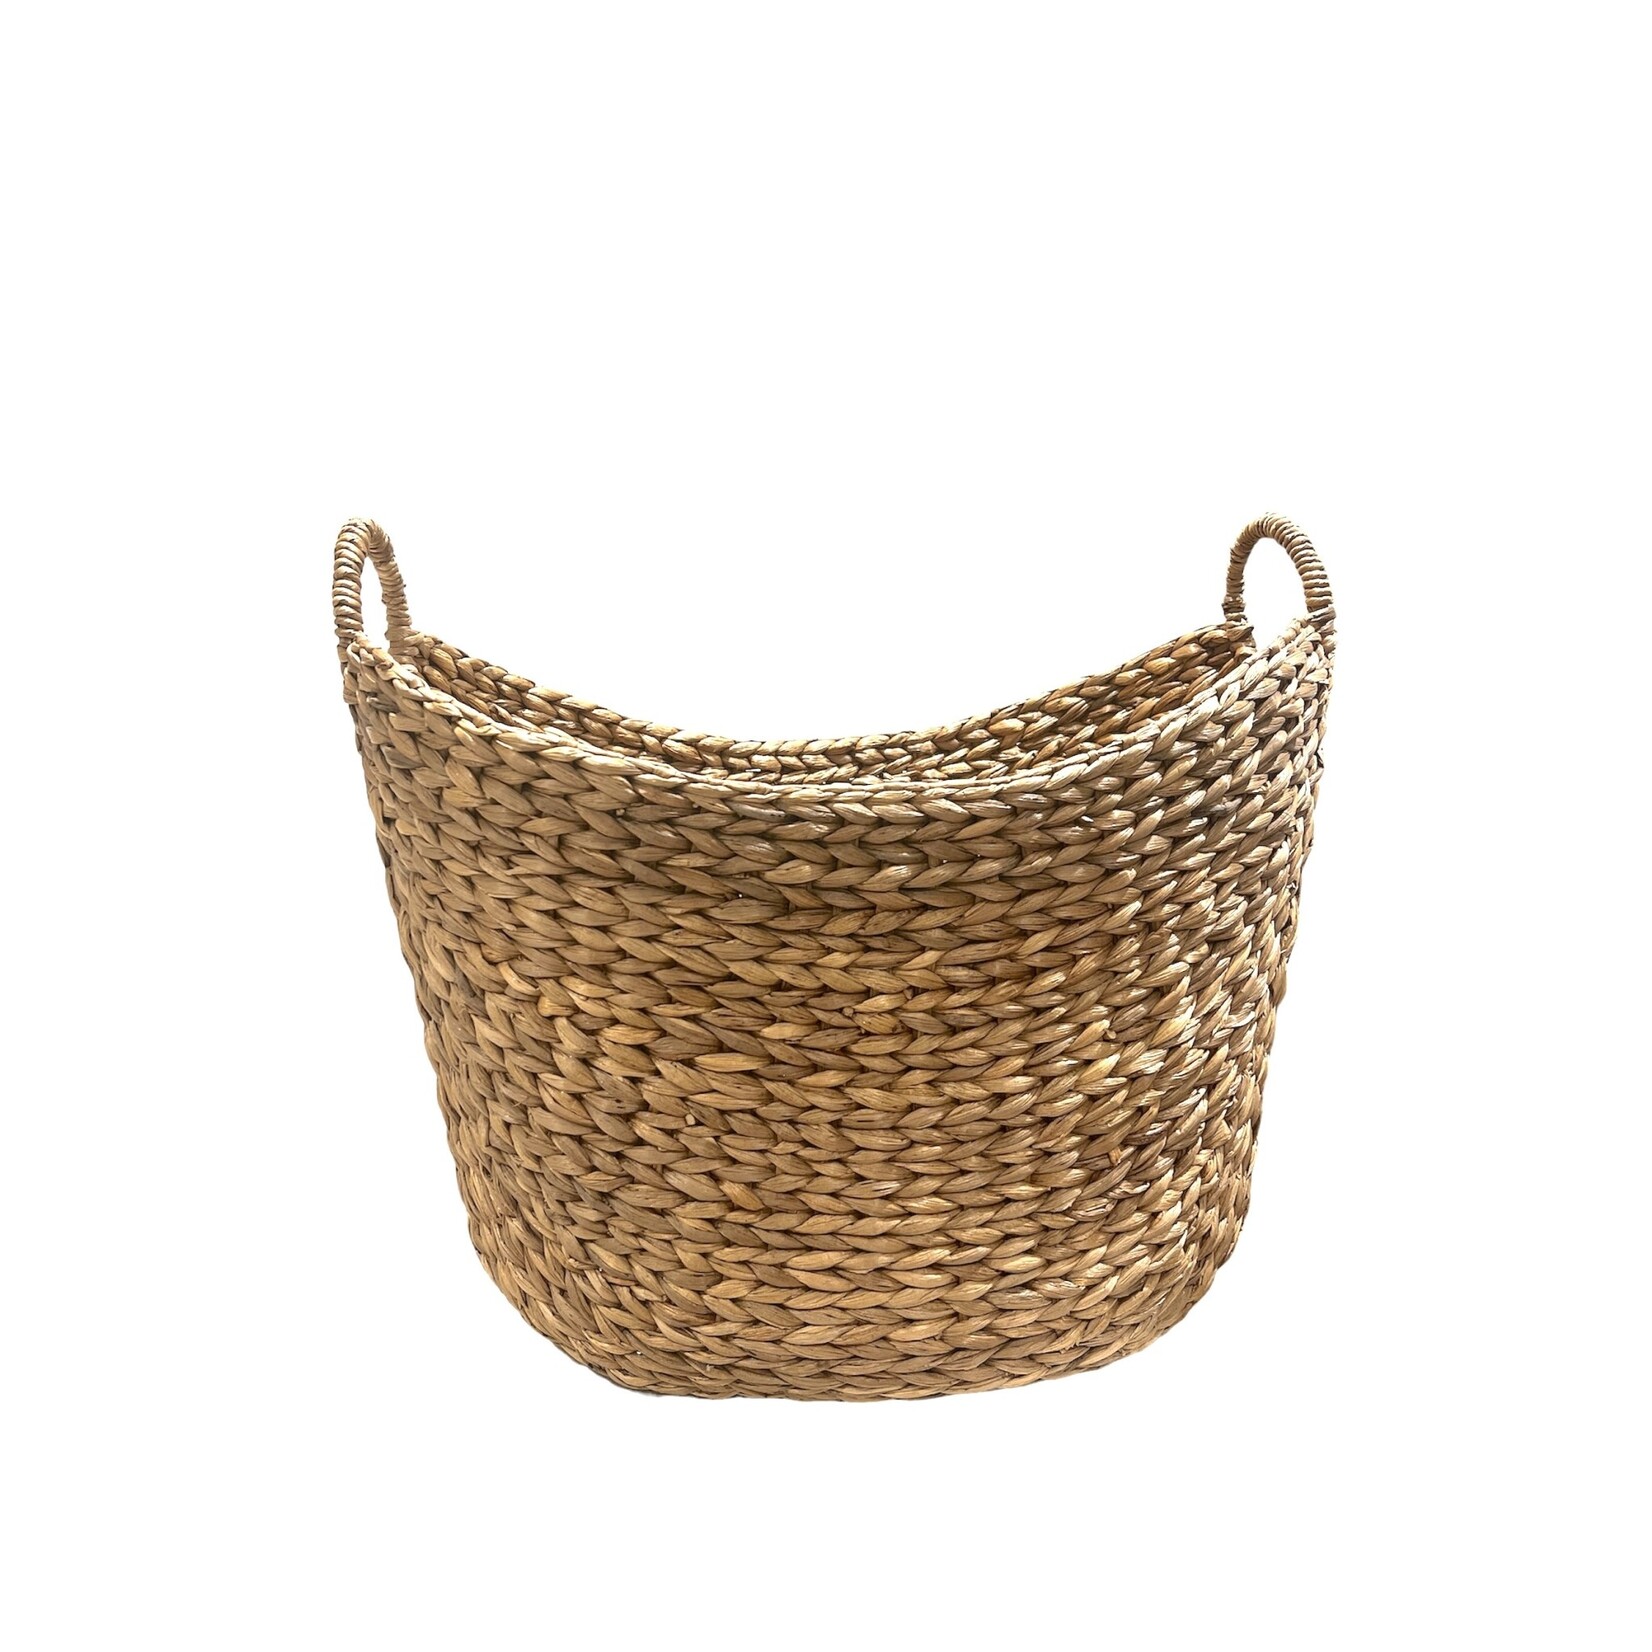 Outside The Box 25" Avah Handwoven Water Hyacinth Baskets